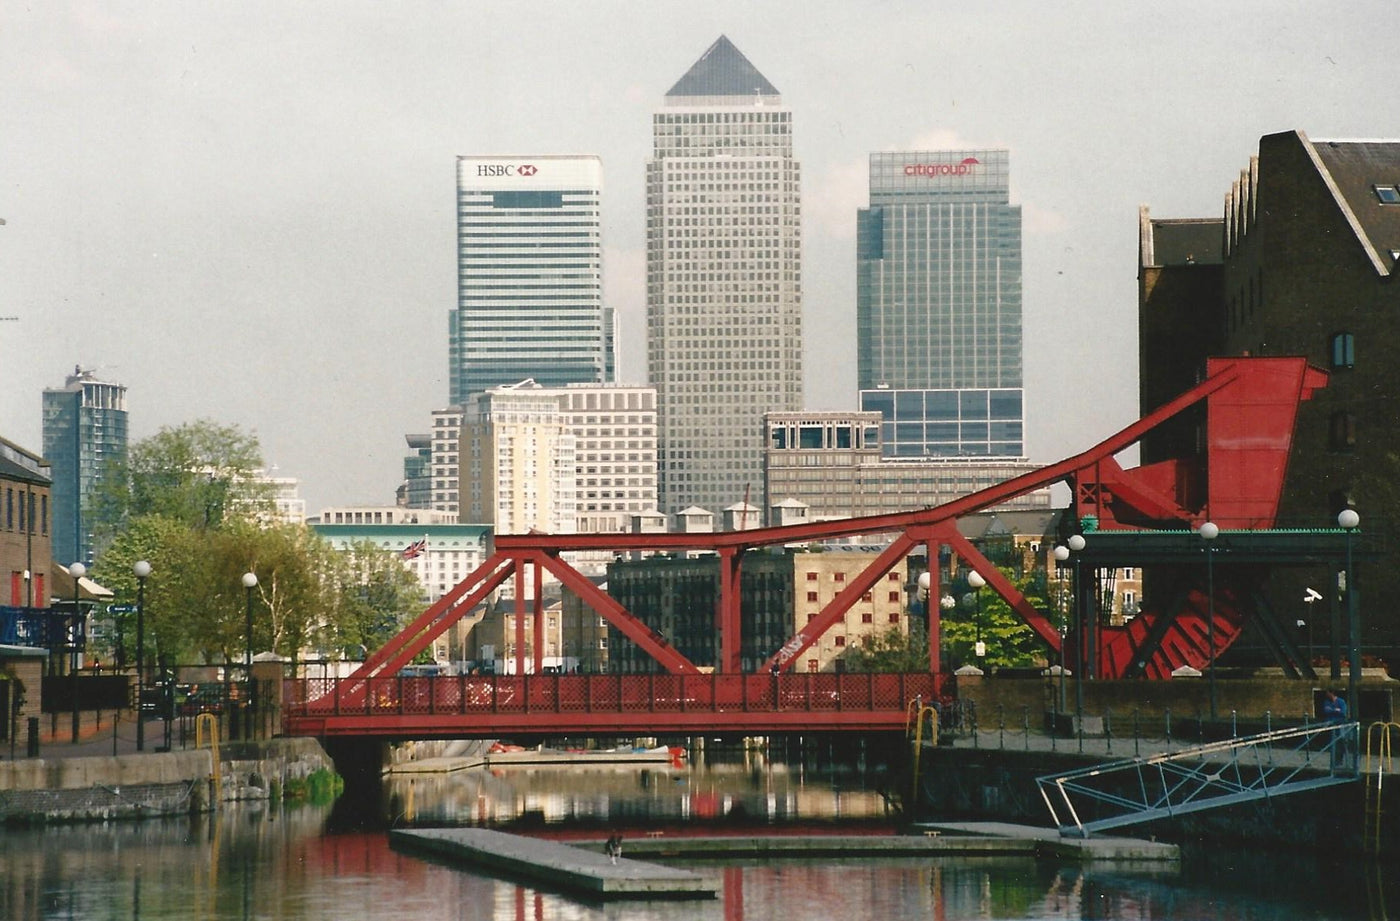 Canary Wharf and dog photograph by Reginald Beer